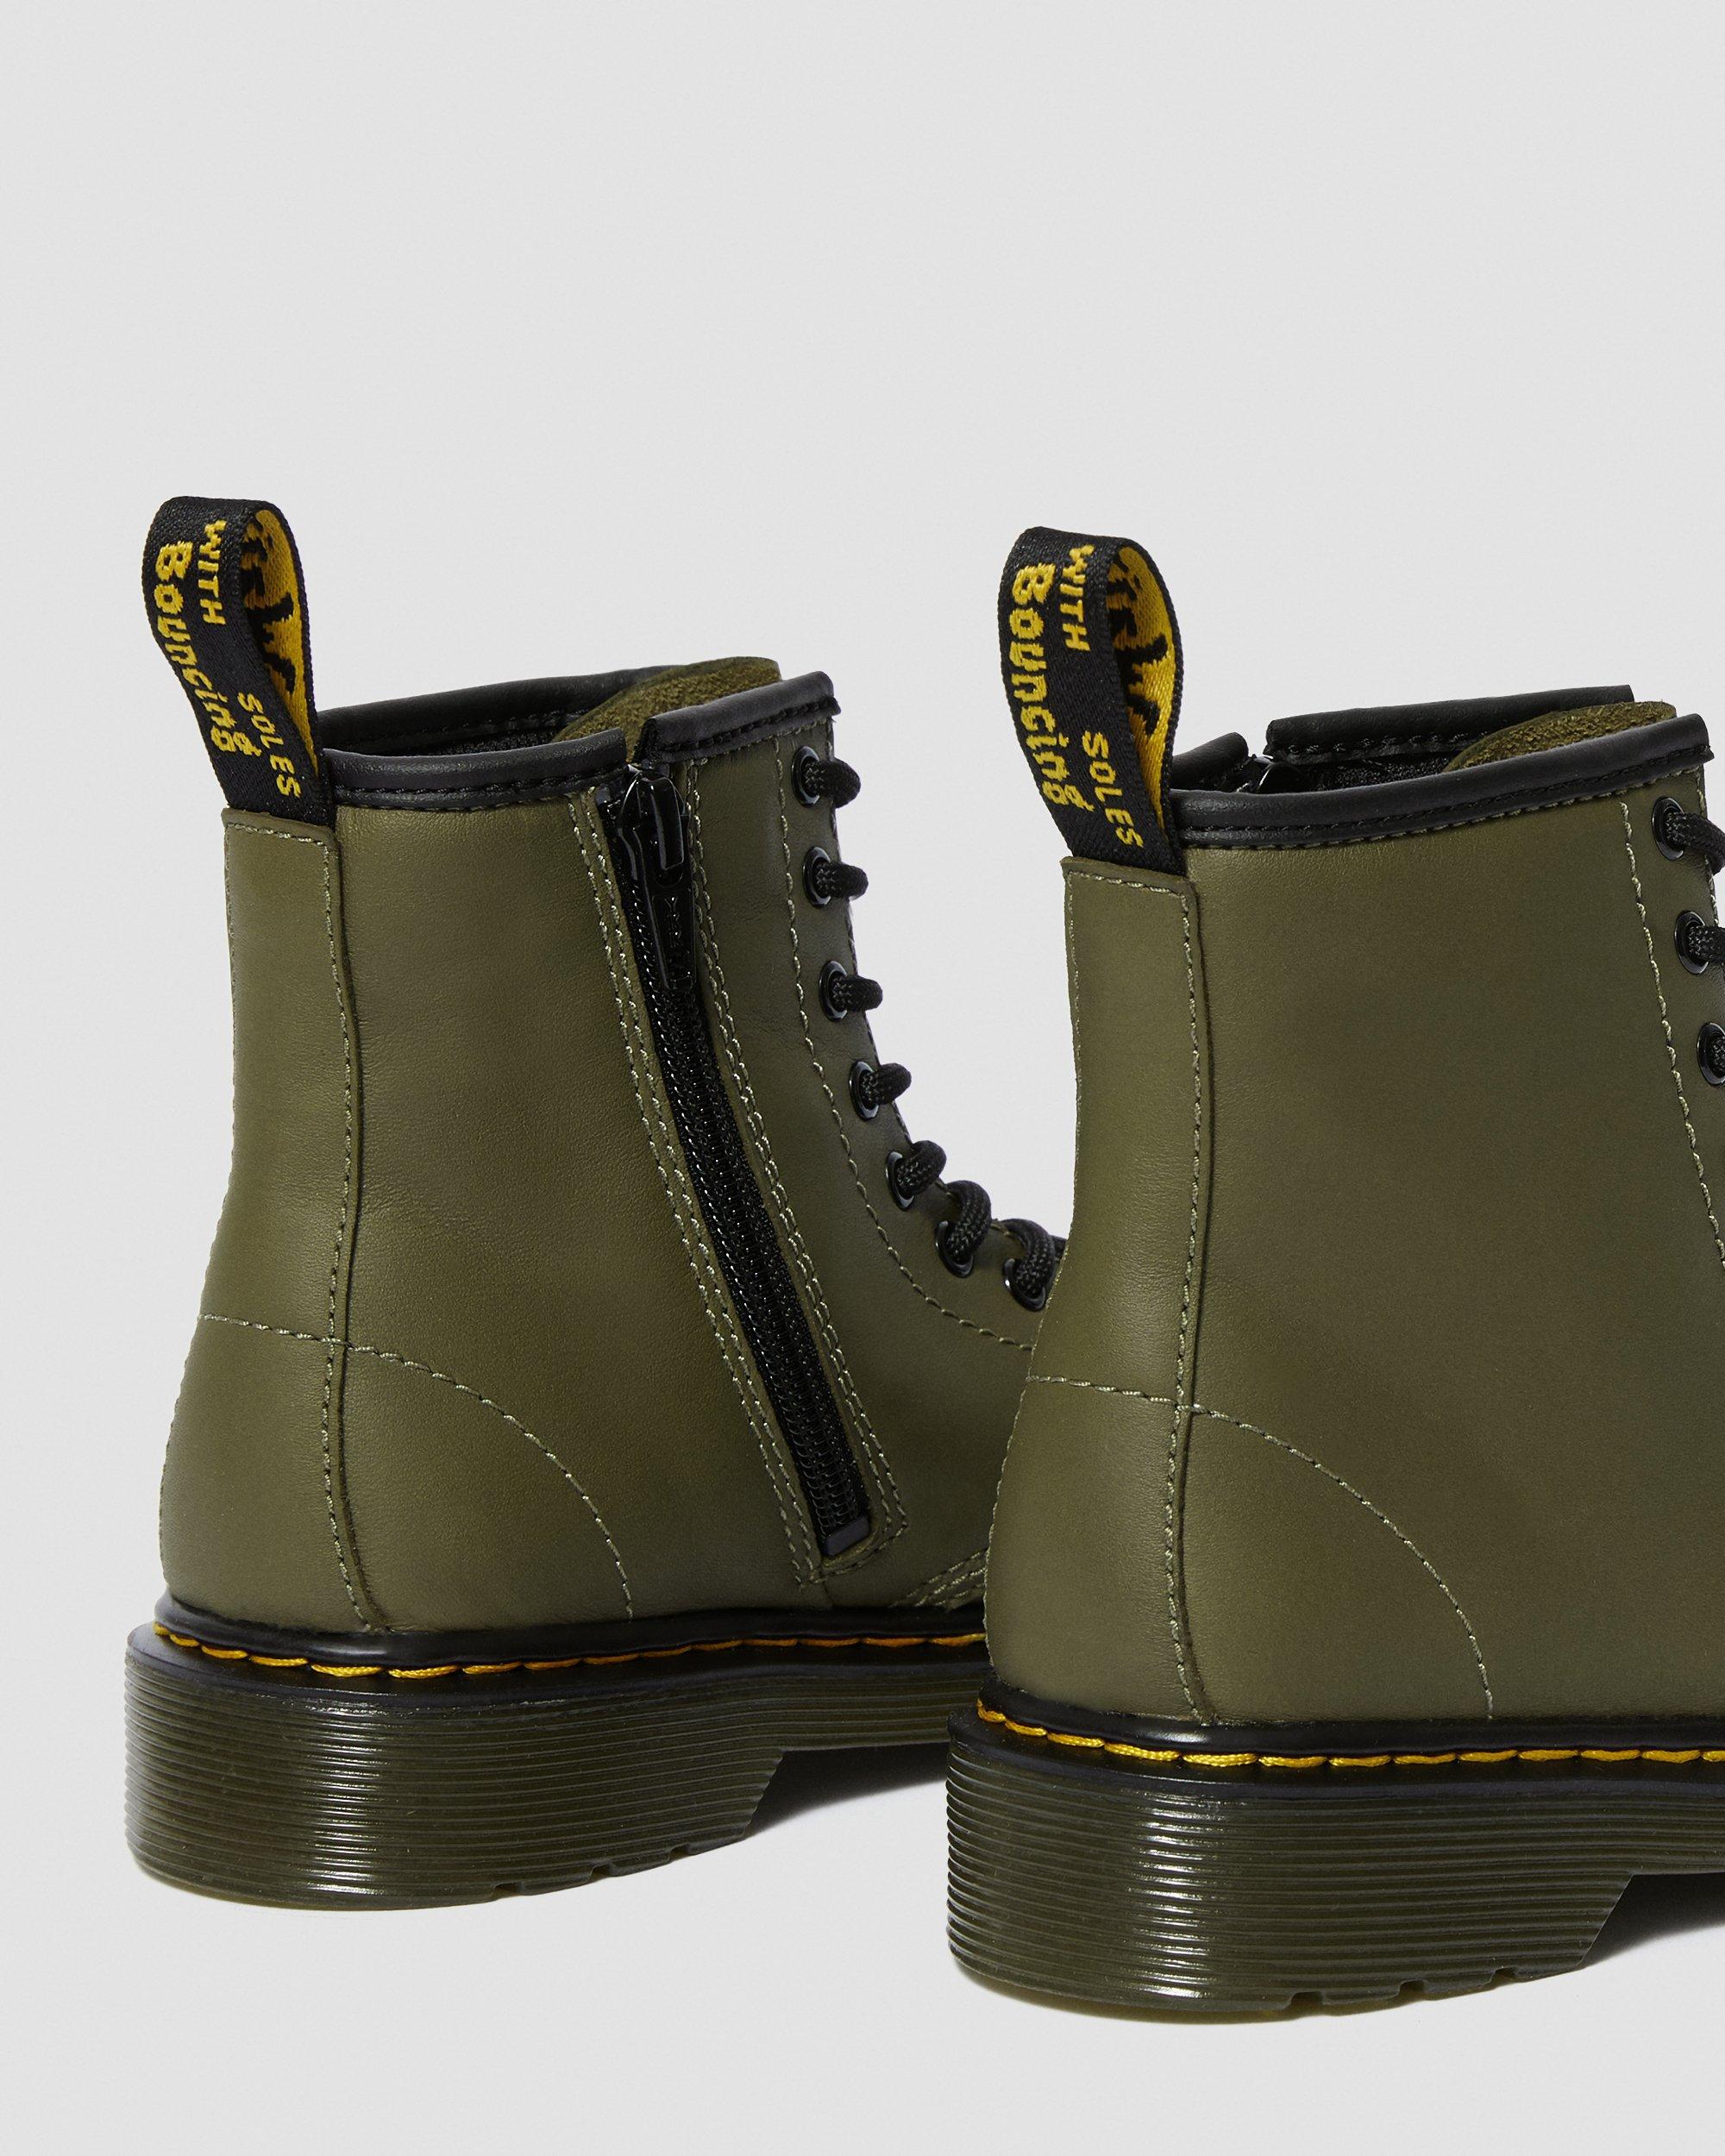 Boots Lace | Up Olive 1460 Martens Dr. Junior Leather in